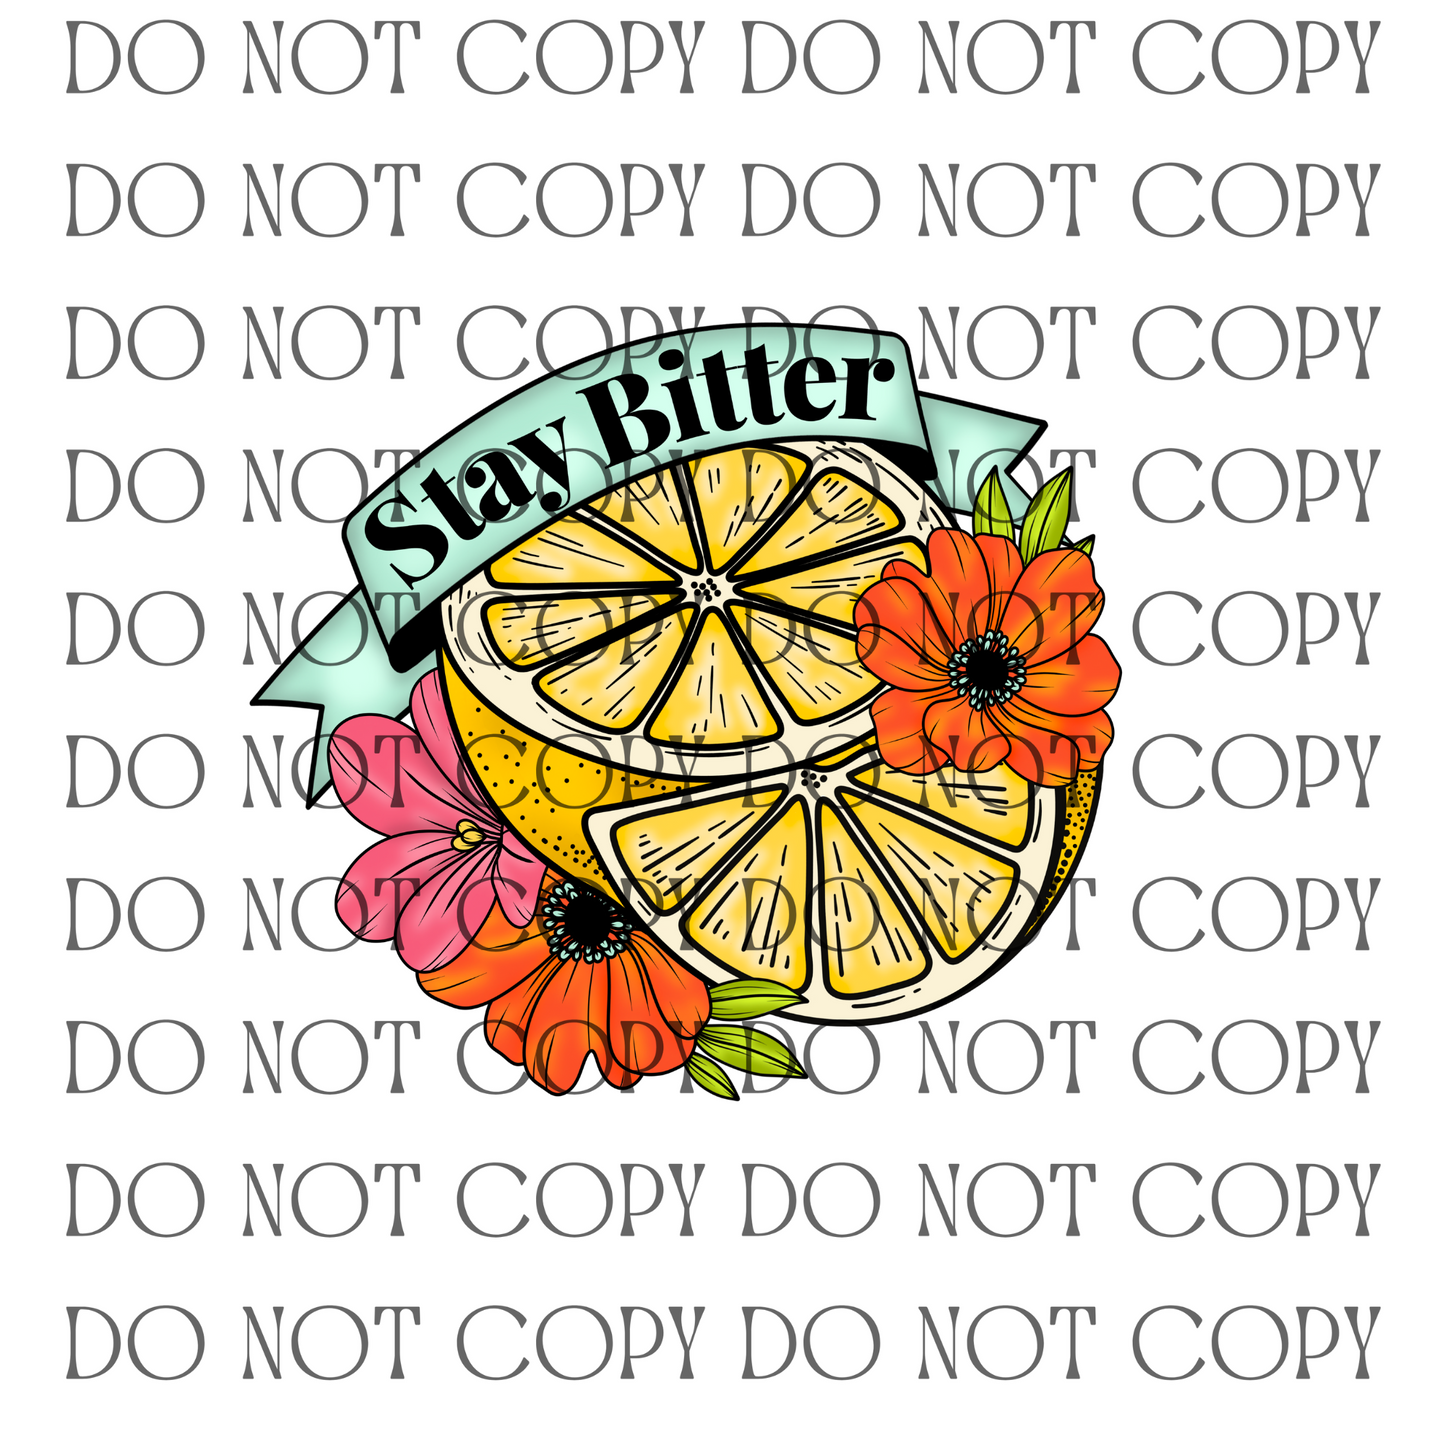 Stay Bitter - Decal